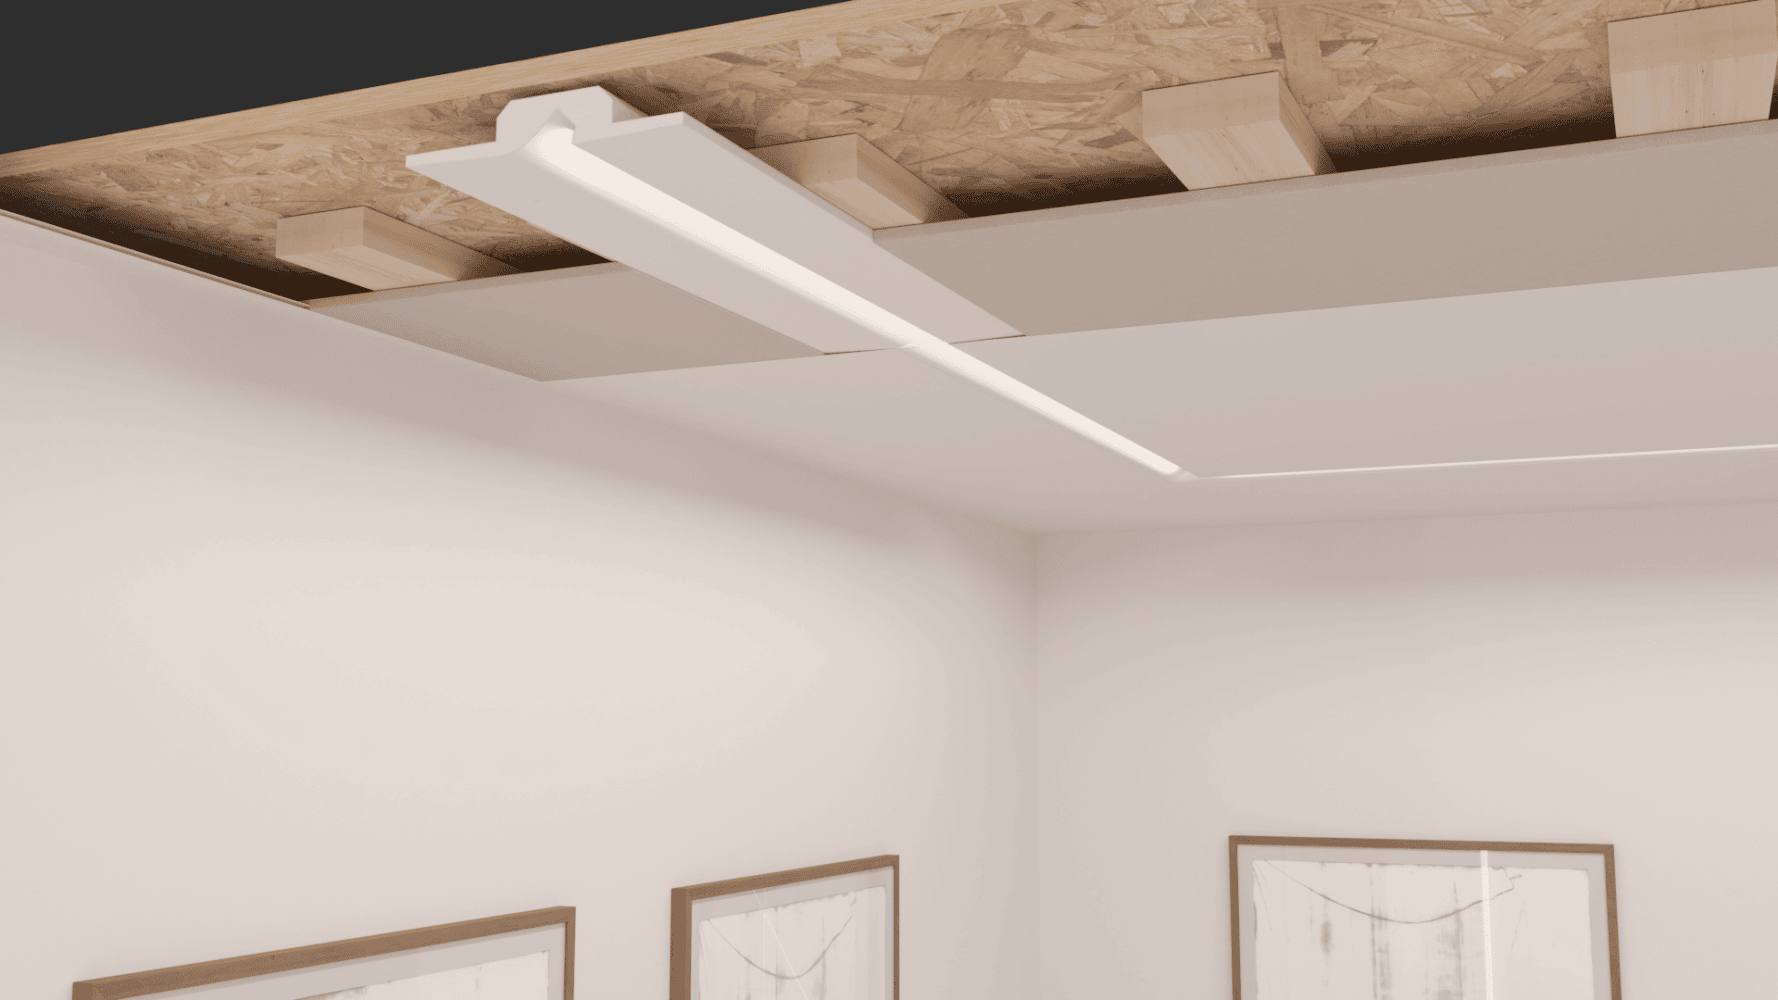 Installation of a home linear ligth with the Gypsum Latus